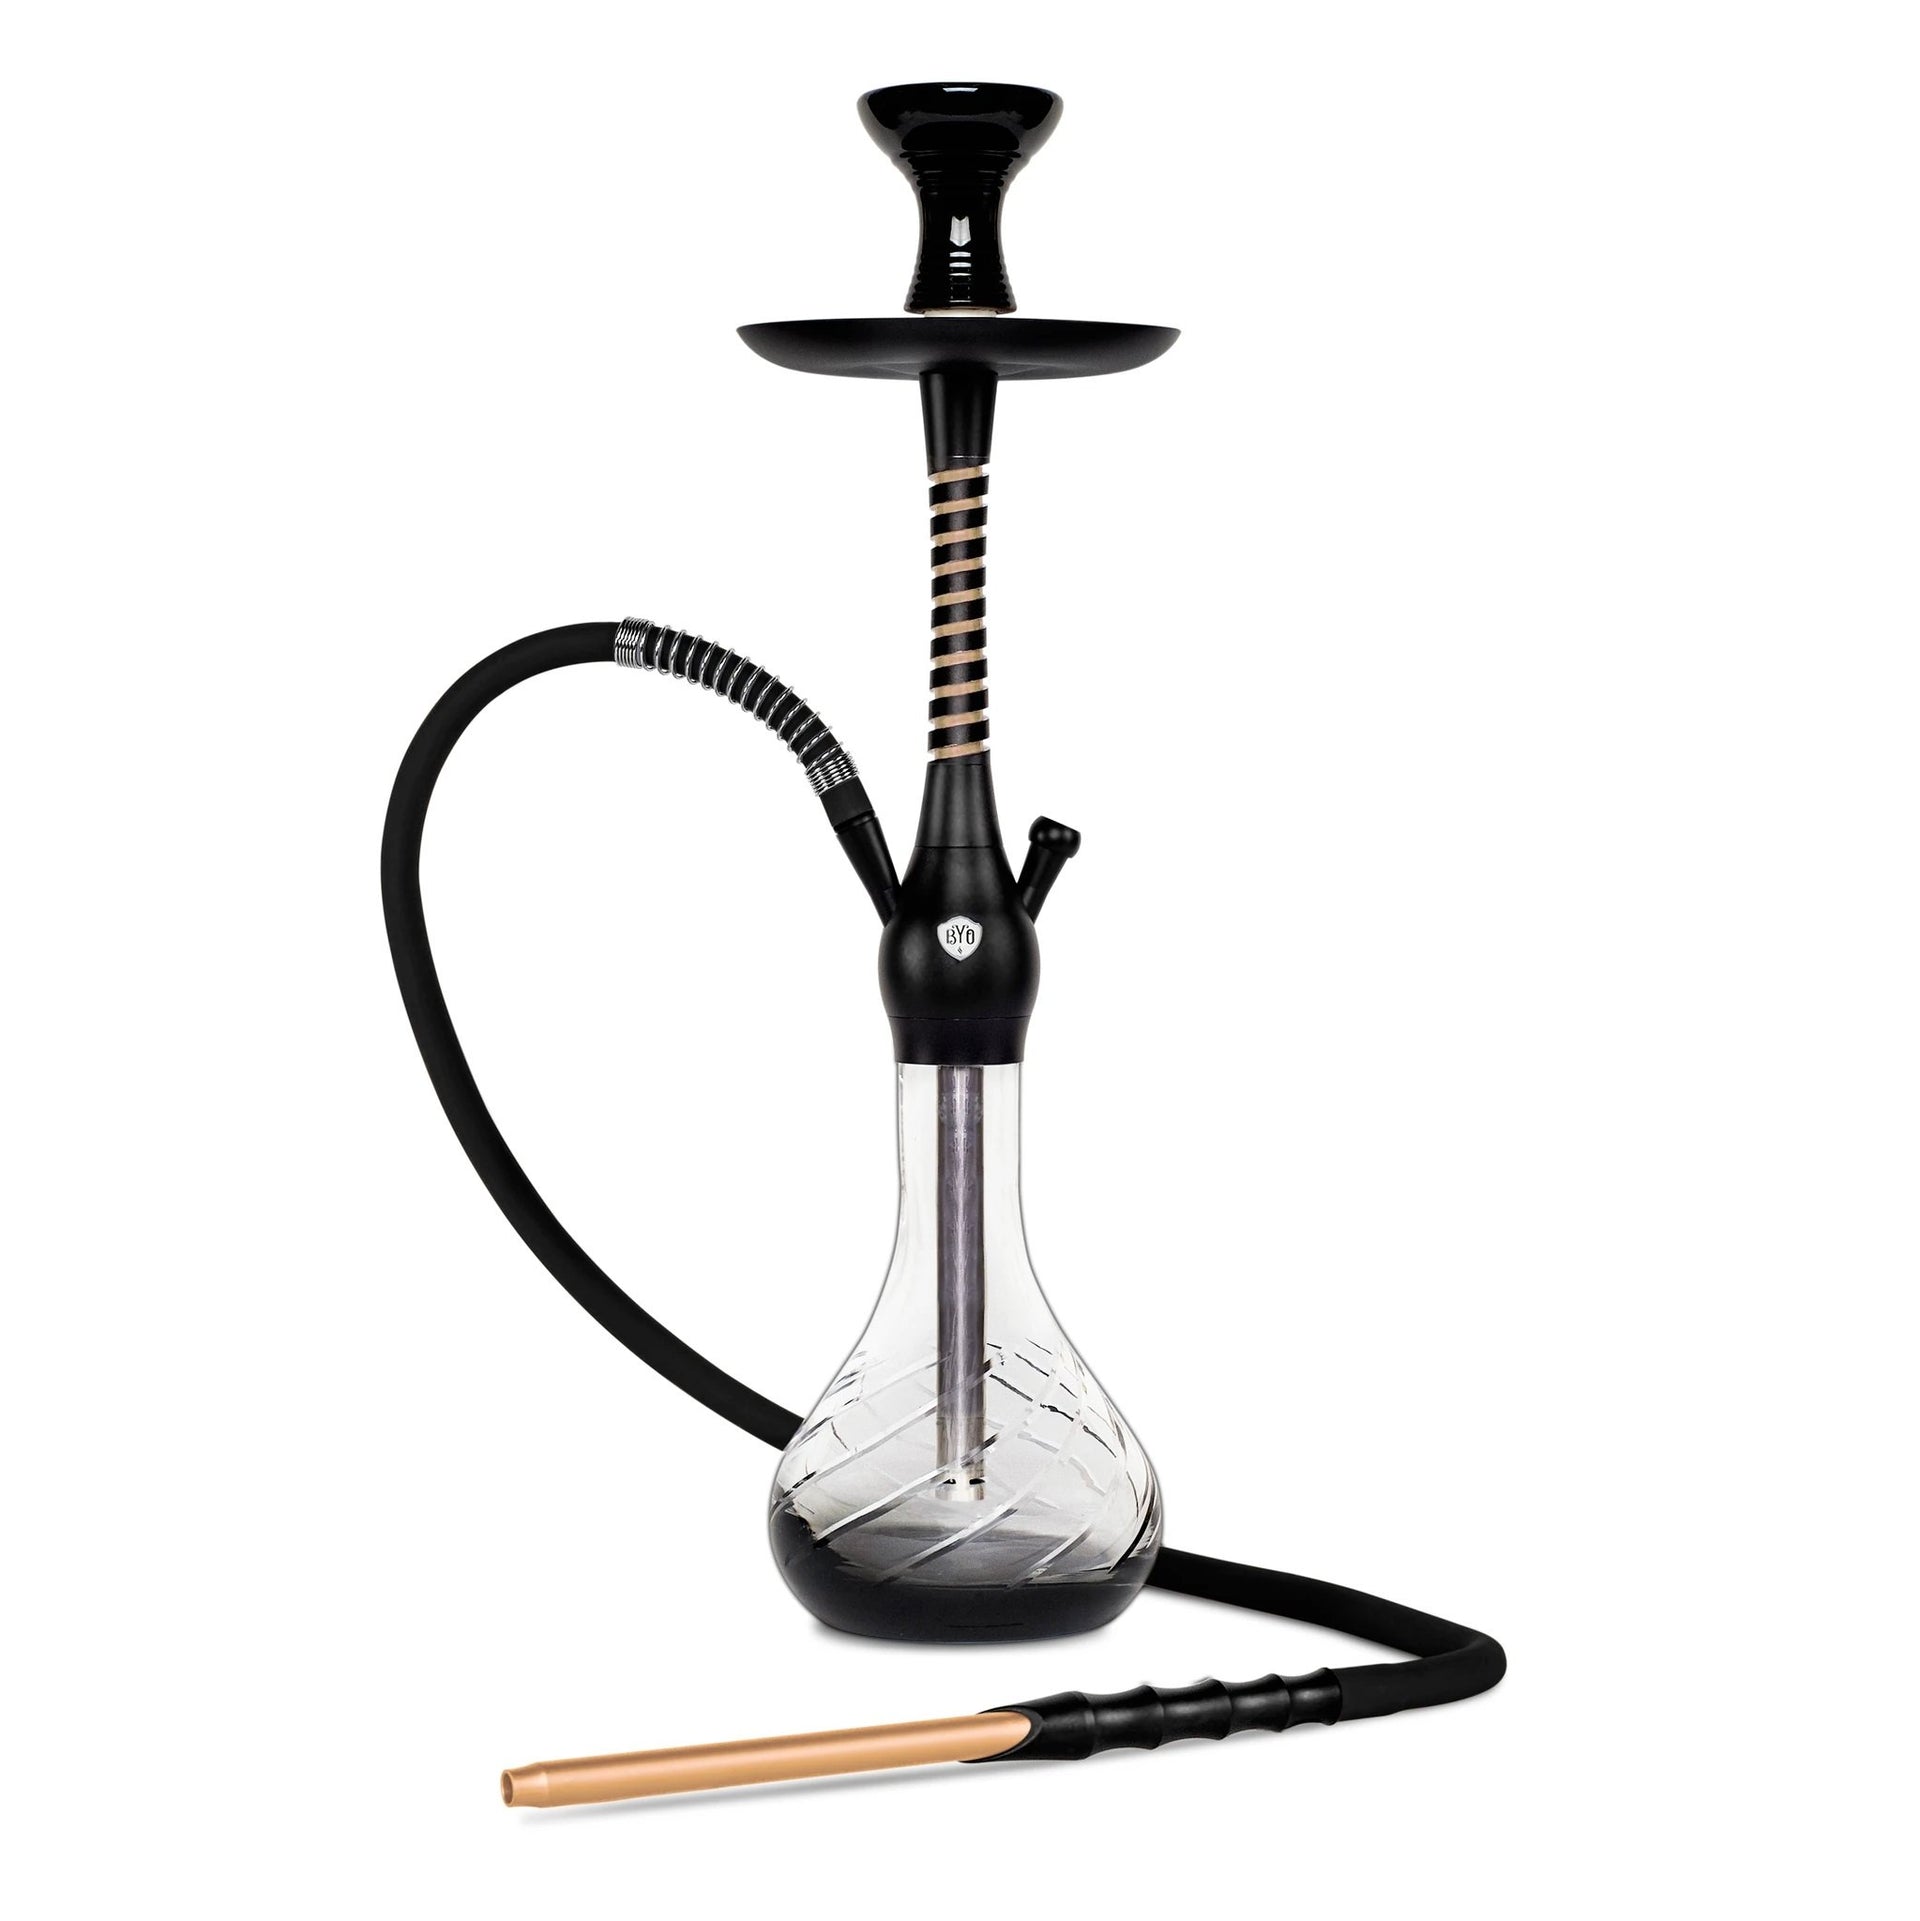 BYO Spirex Hookah 22" gold stem matching clear base and hose